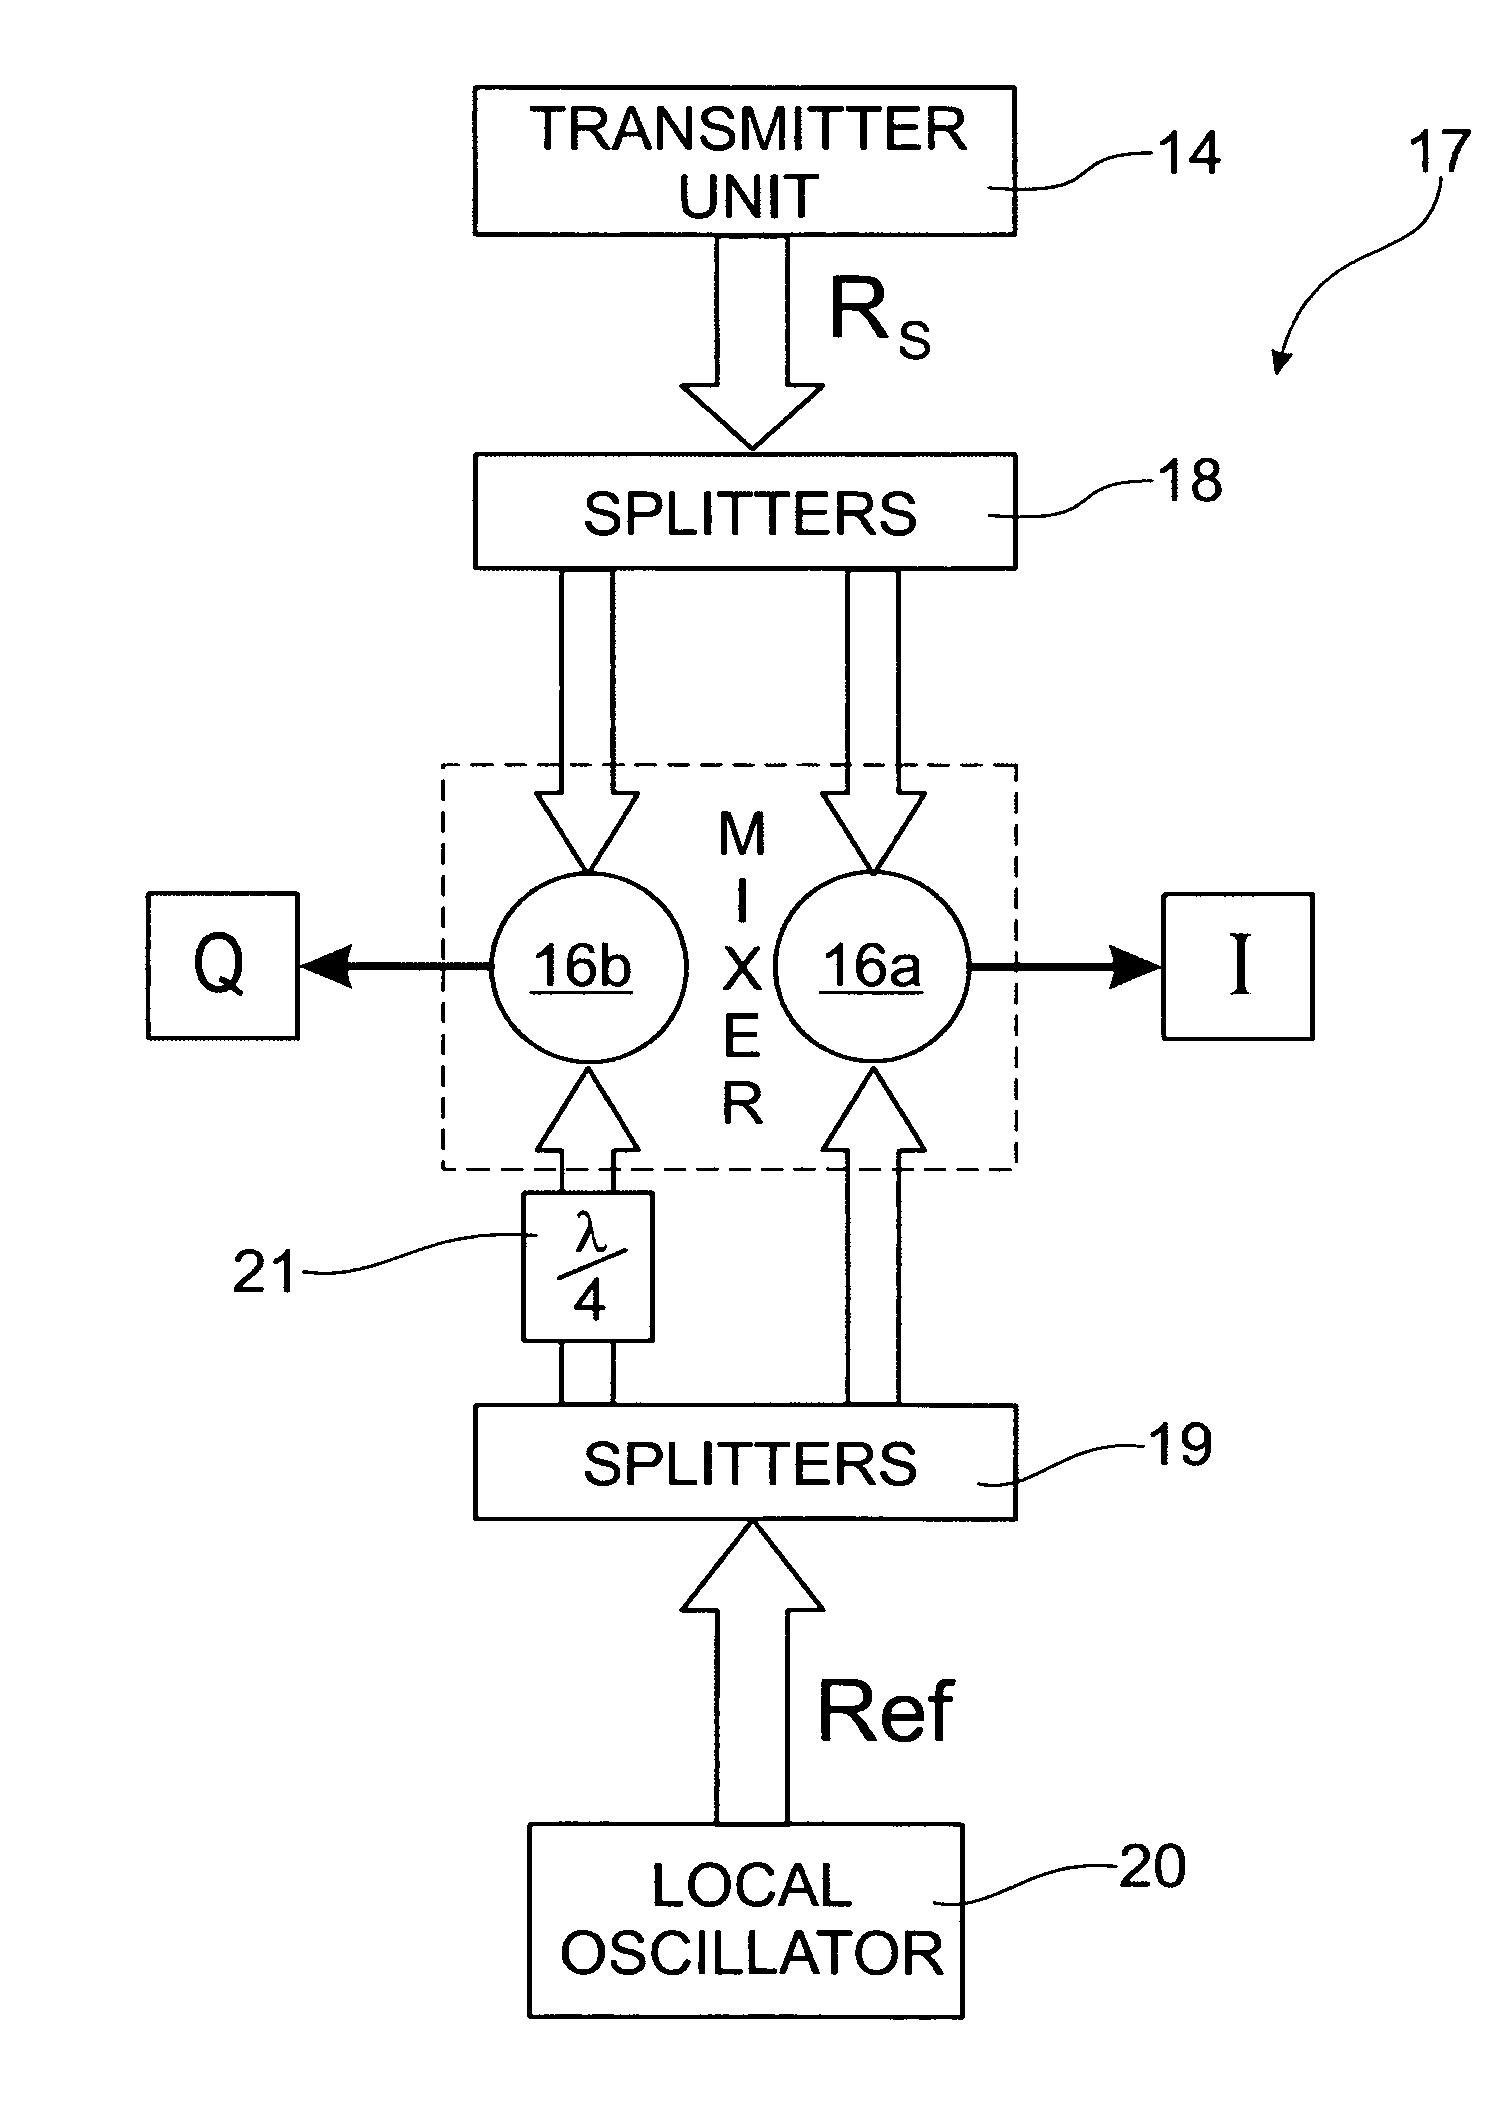 Near-field antenna array with signal processing